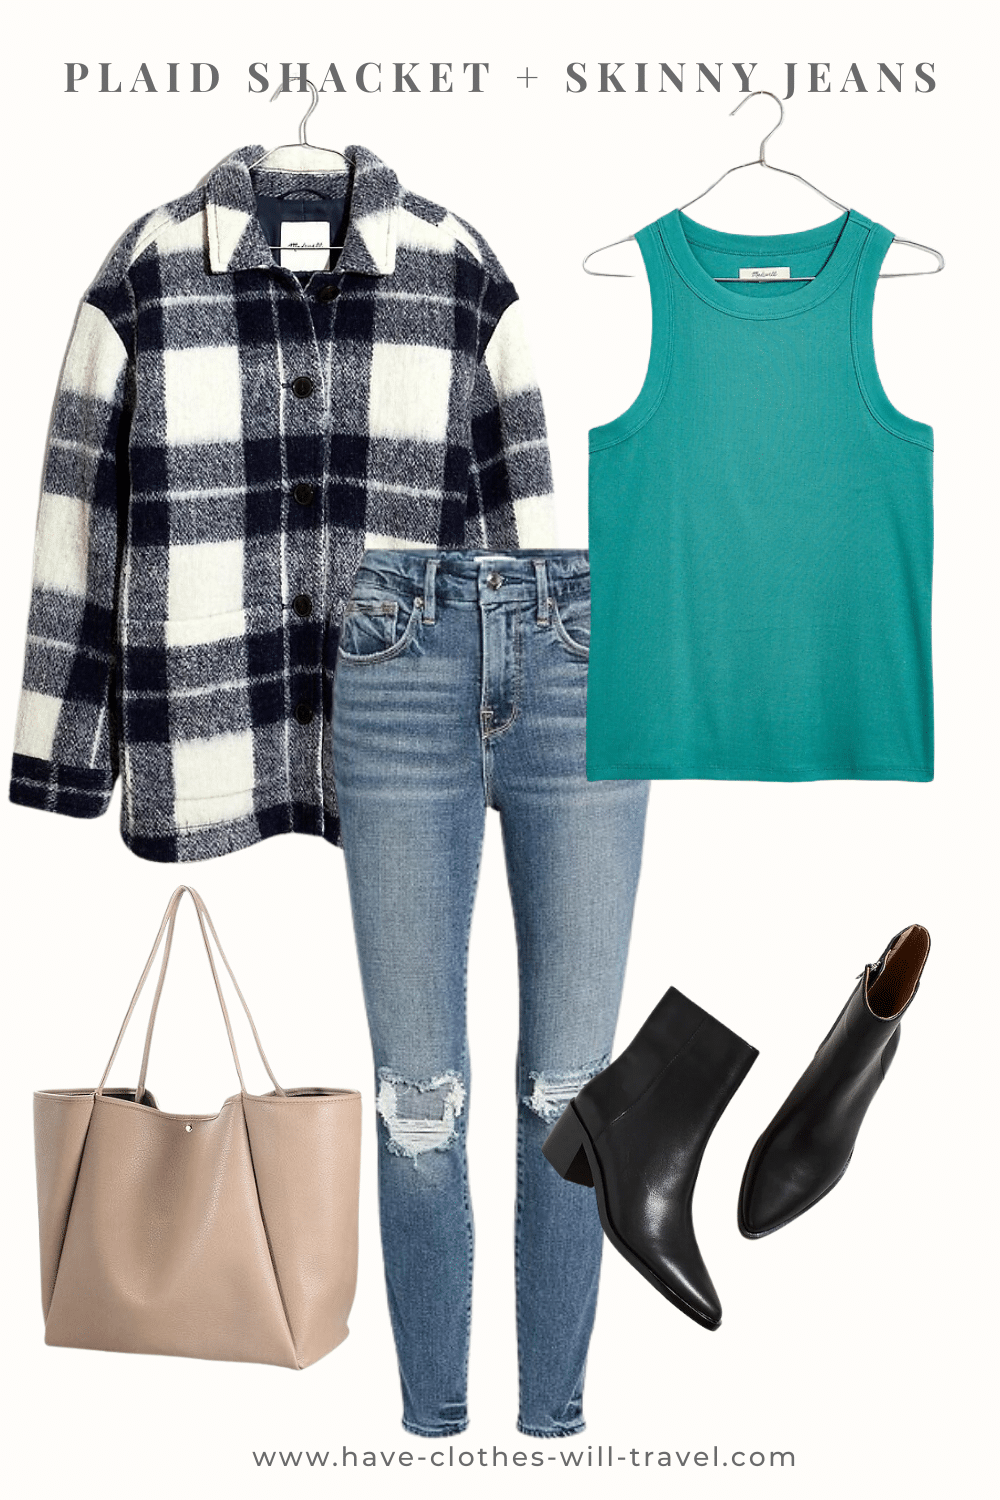 Plaid Shacket with Skinny Jeans and green tank top and tan bag